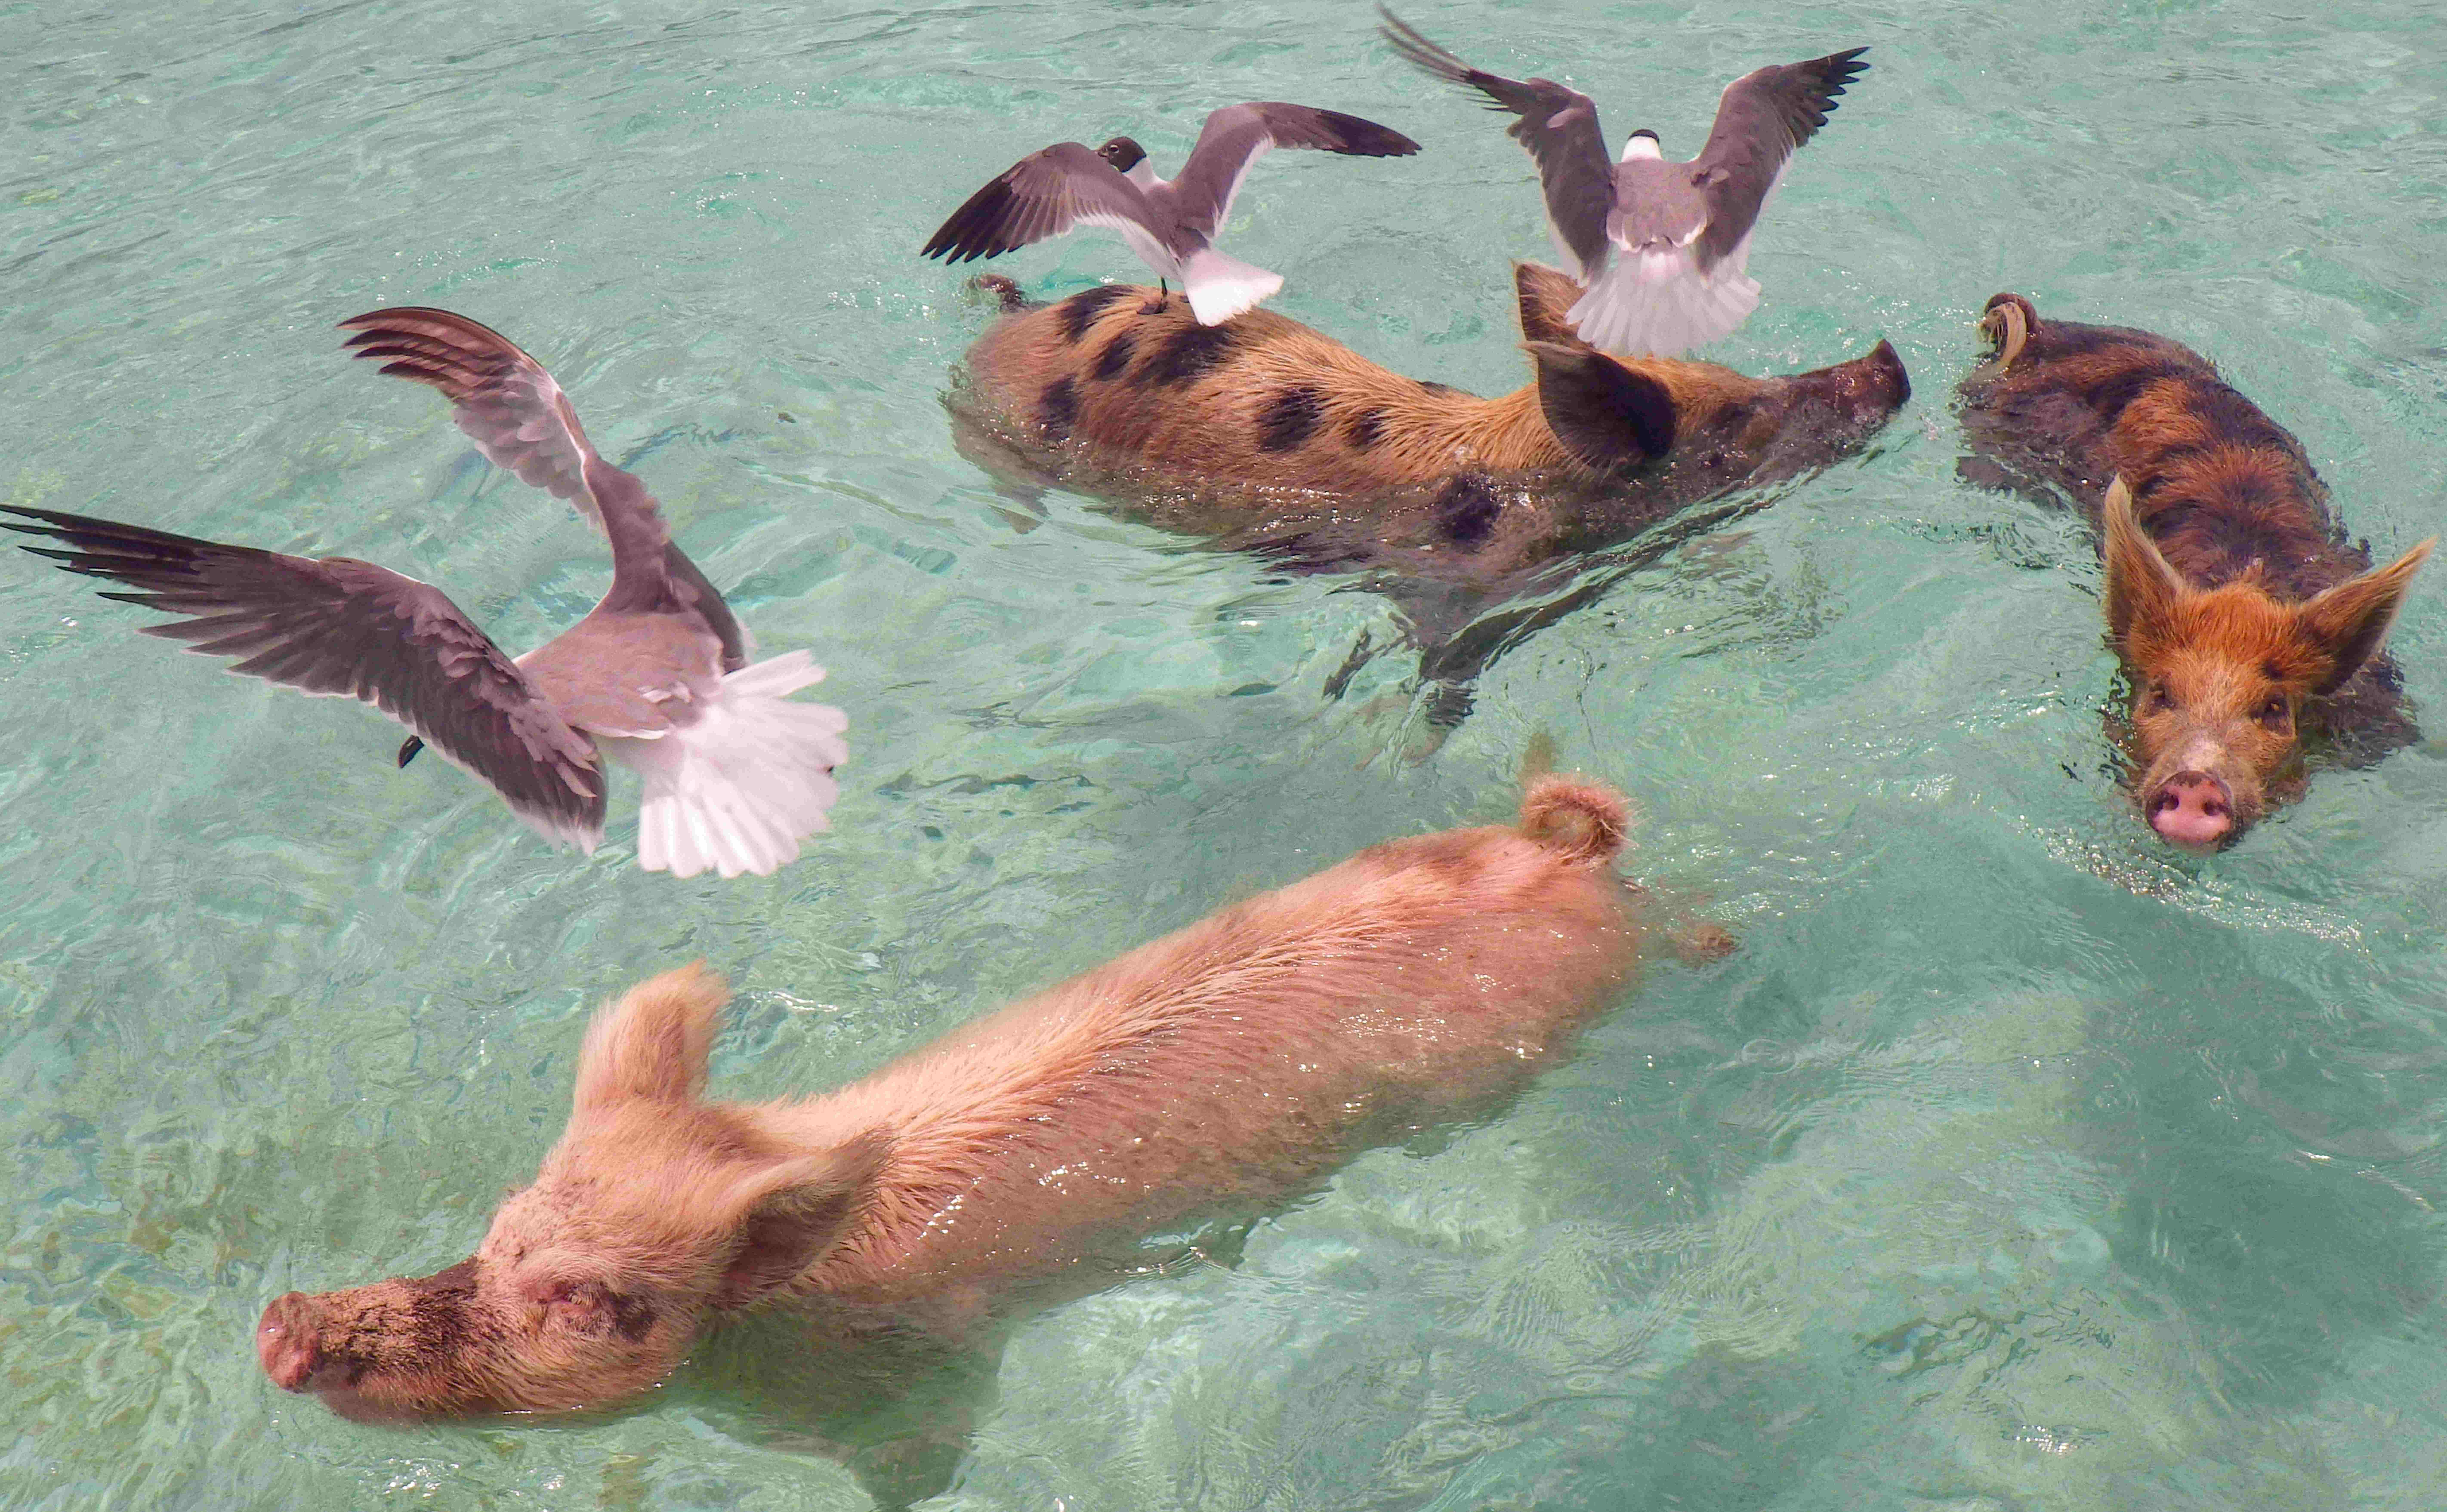 Funny swimming pigs with seagulls